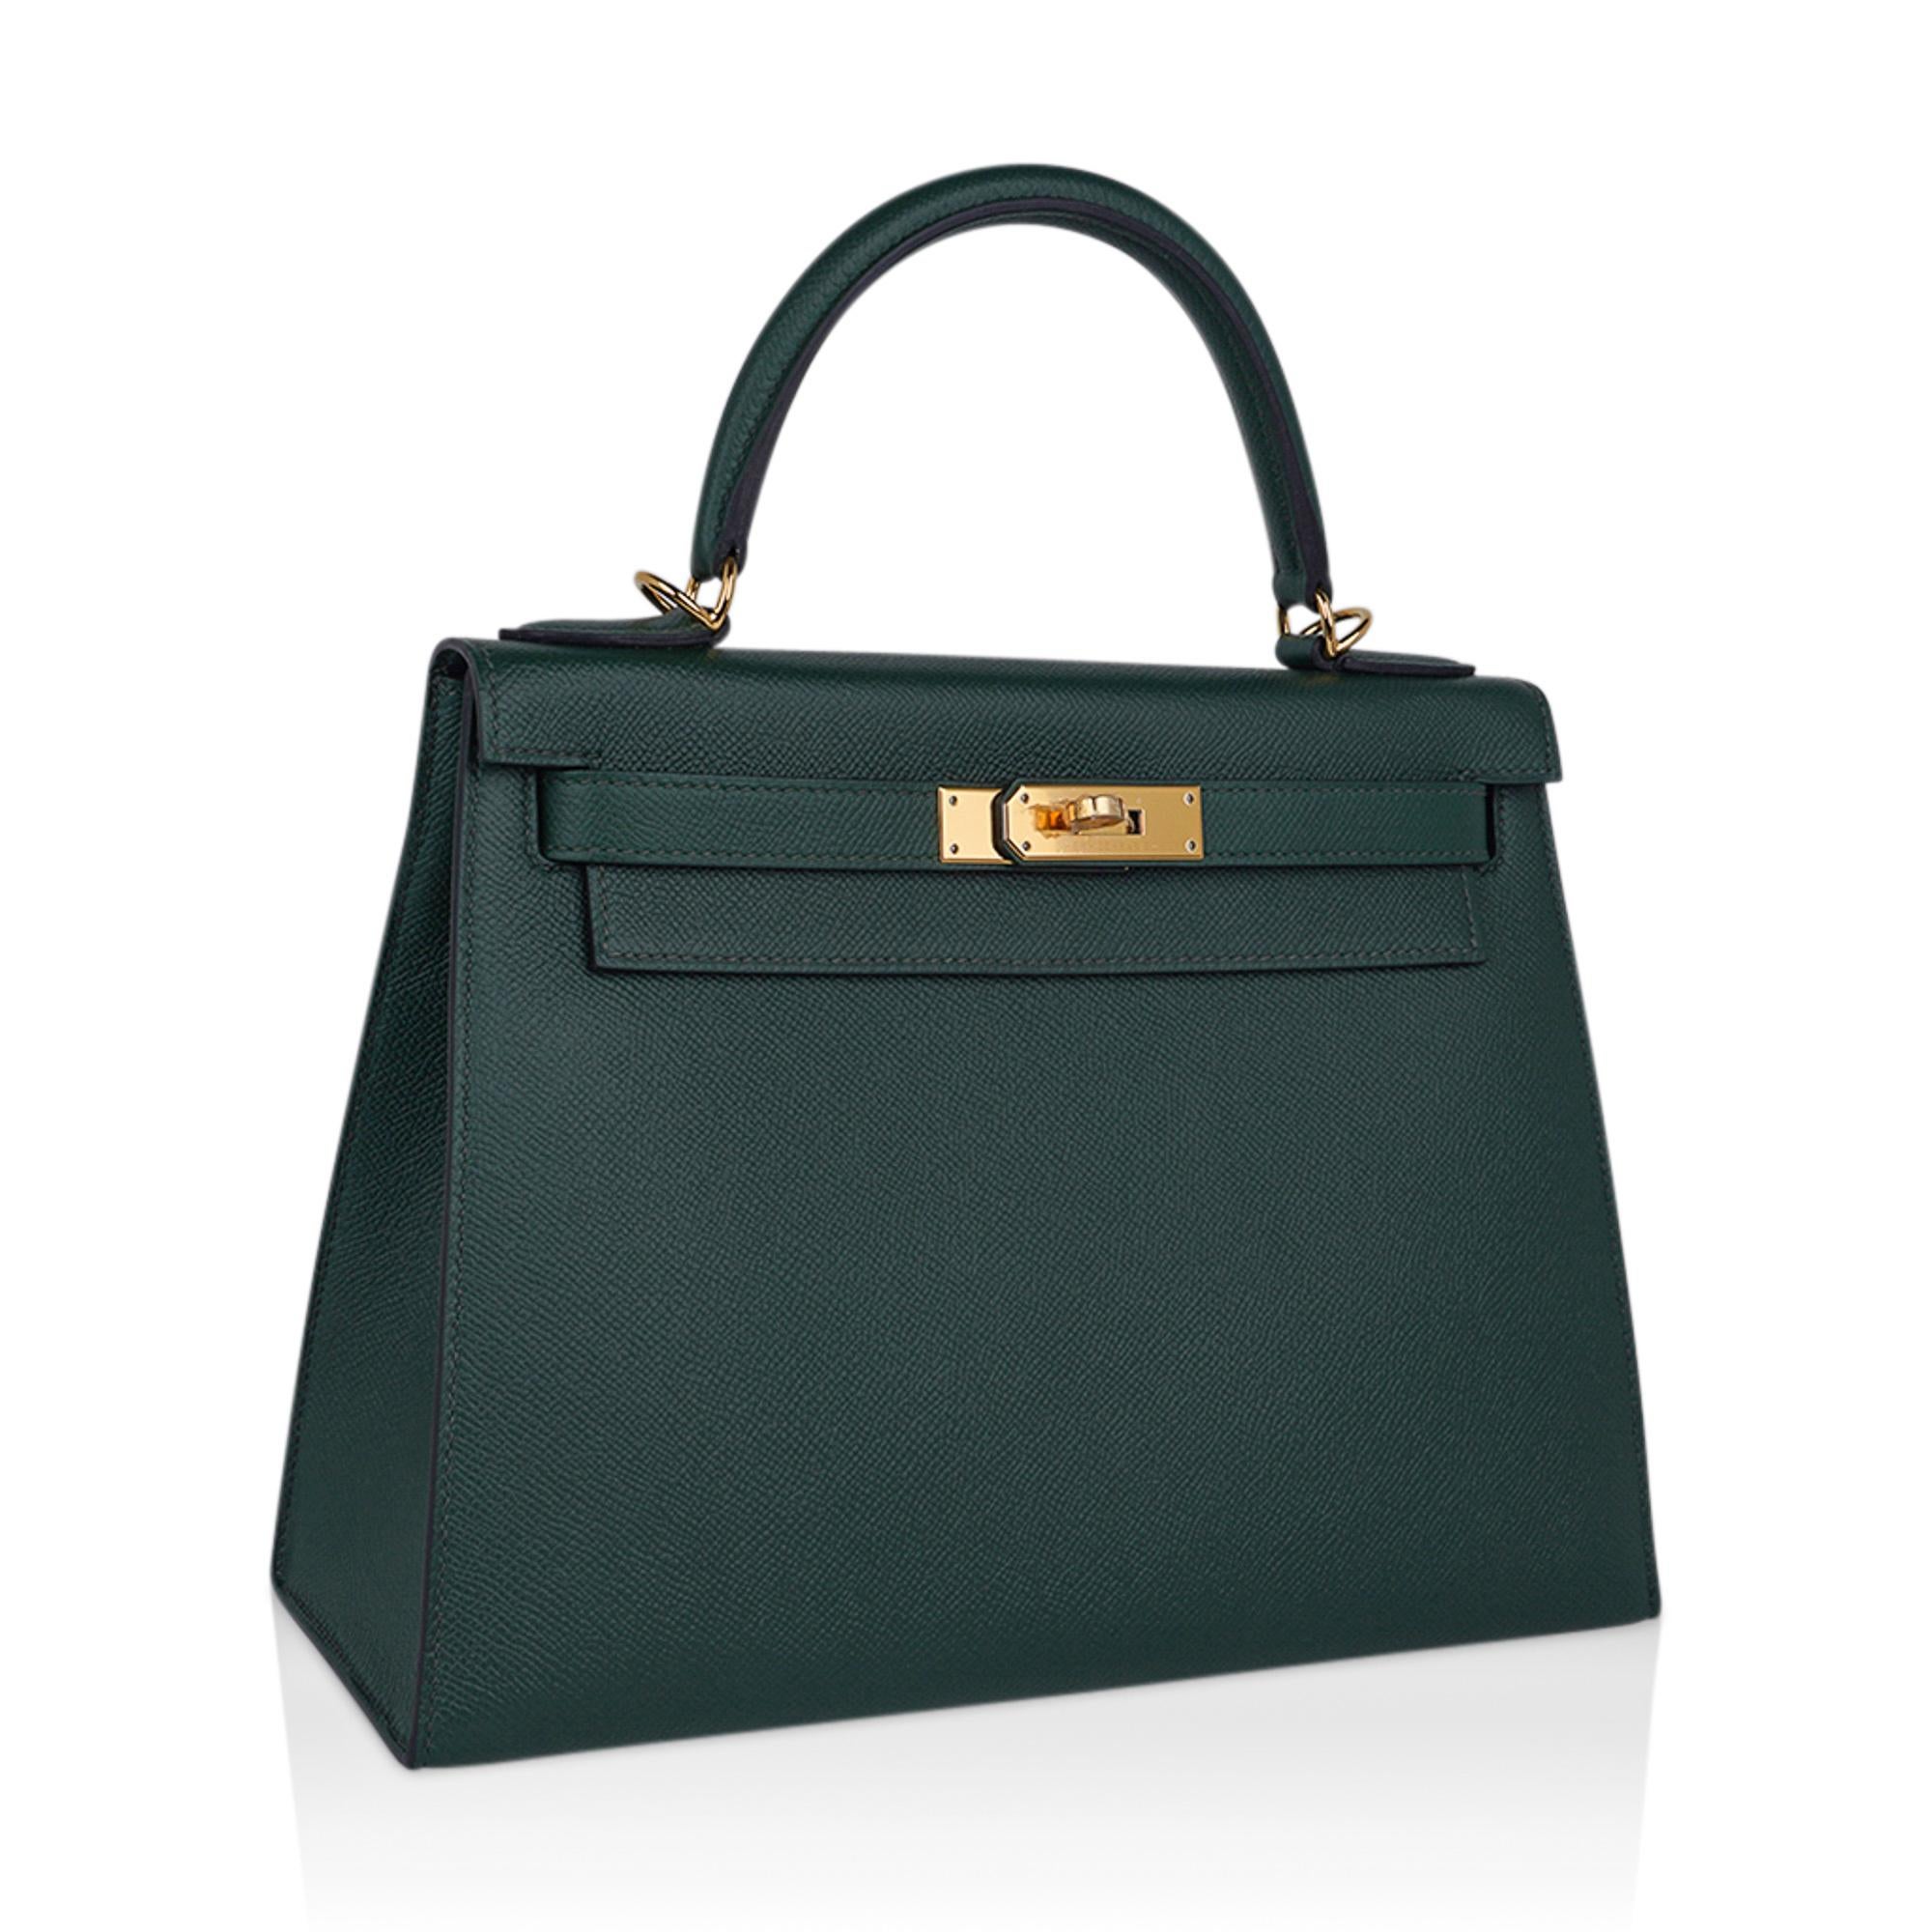 Mightychic offers an Hermes Kelly Sellier 28 bag featured in Vert Anglais.
This exquisite deep rich racing green is no longer produced and a rare find!
Epsom leather absorbs colour beautifully and is frequently used for special hues..
Lush with Gold